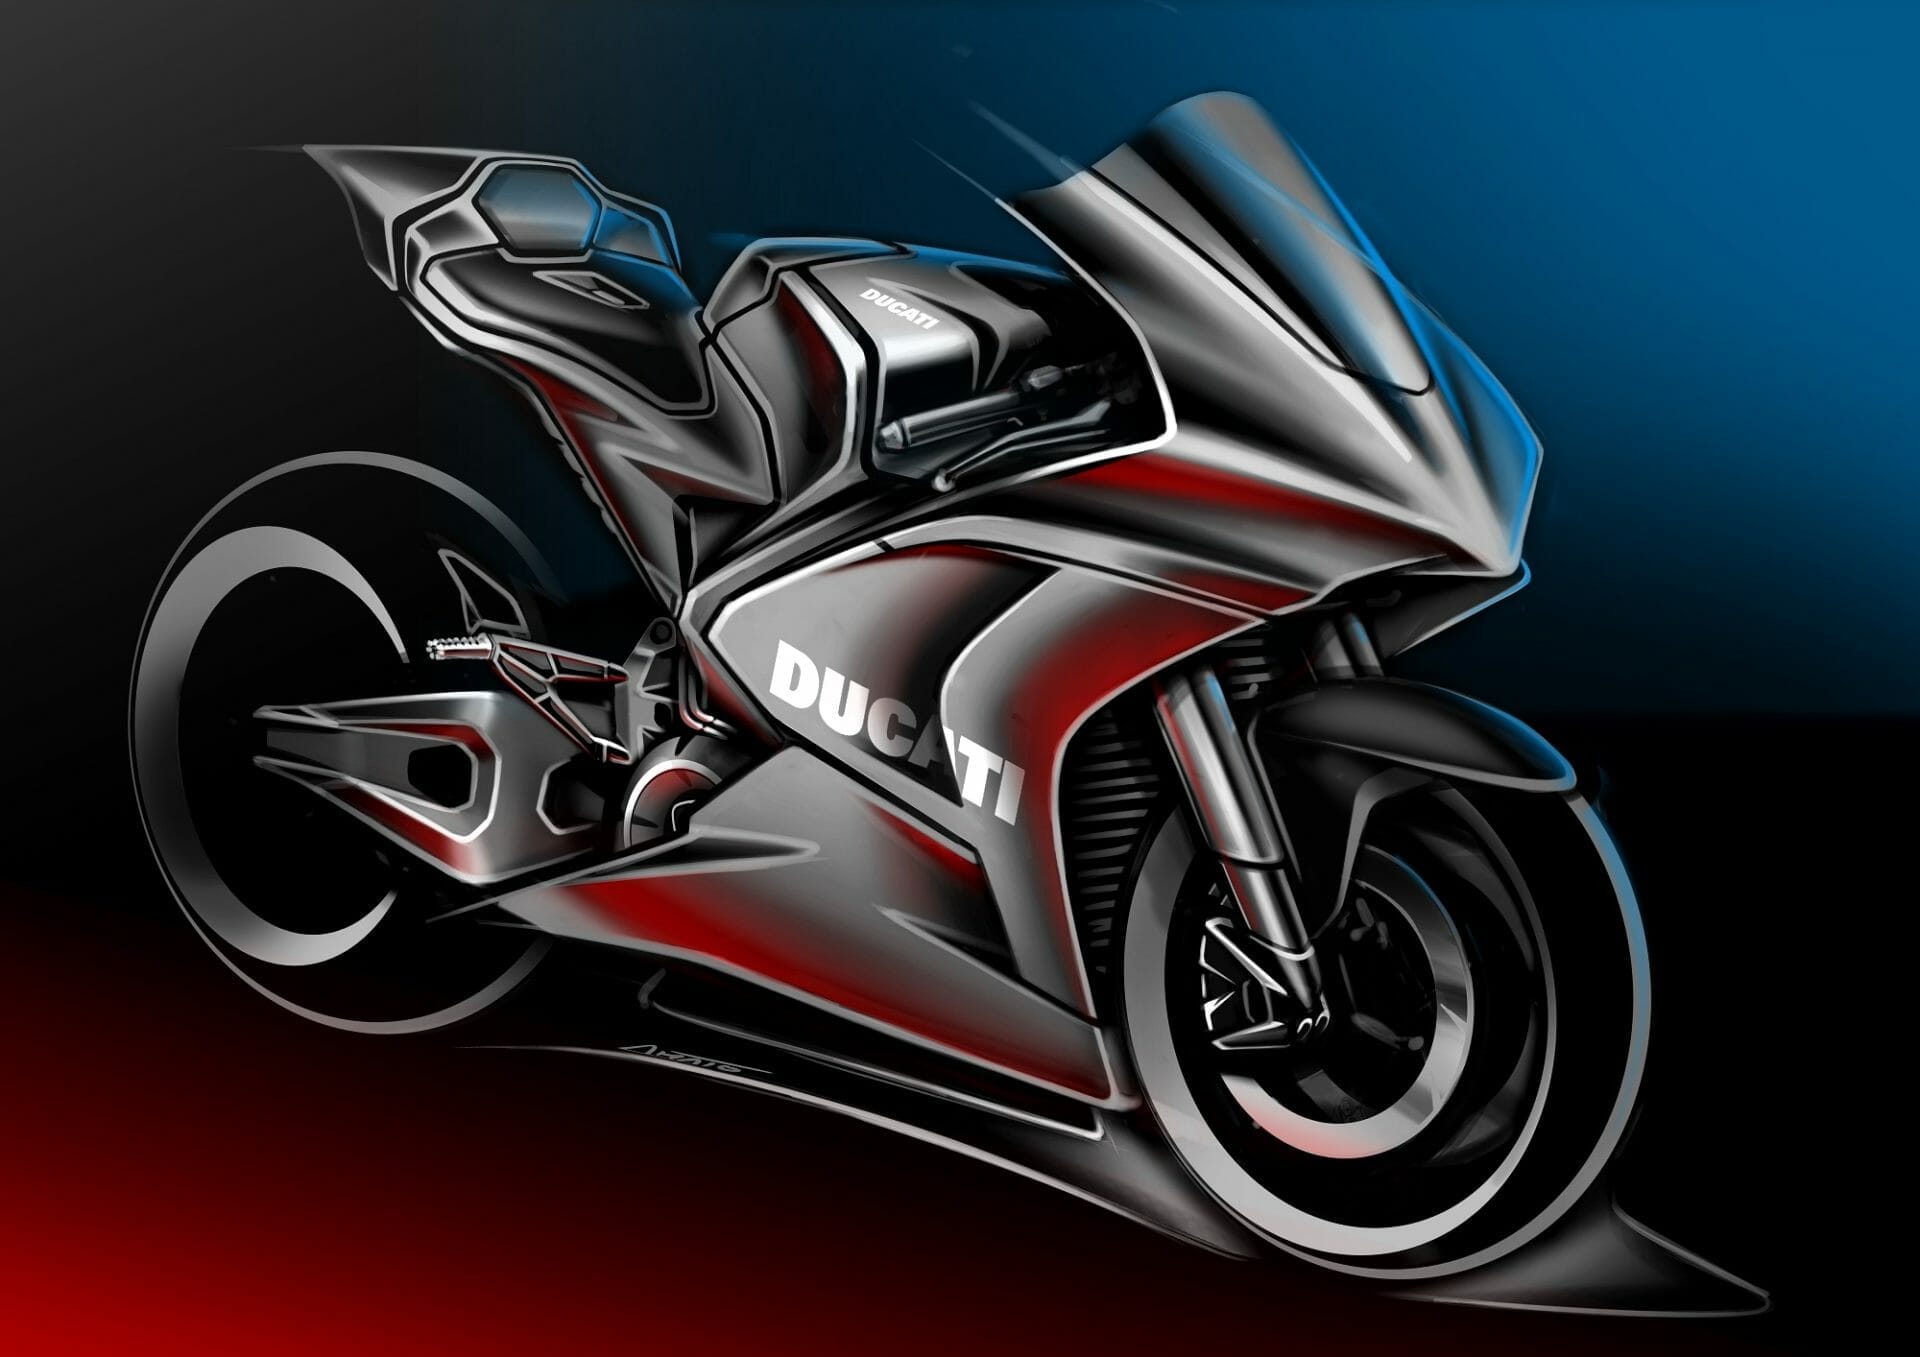 Ducati with electric superbike in MotoE
- also in the MOTORCYCLES.NEWS APP